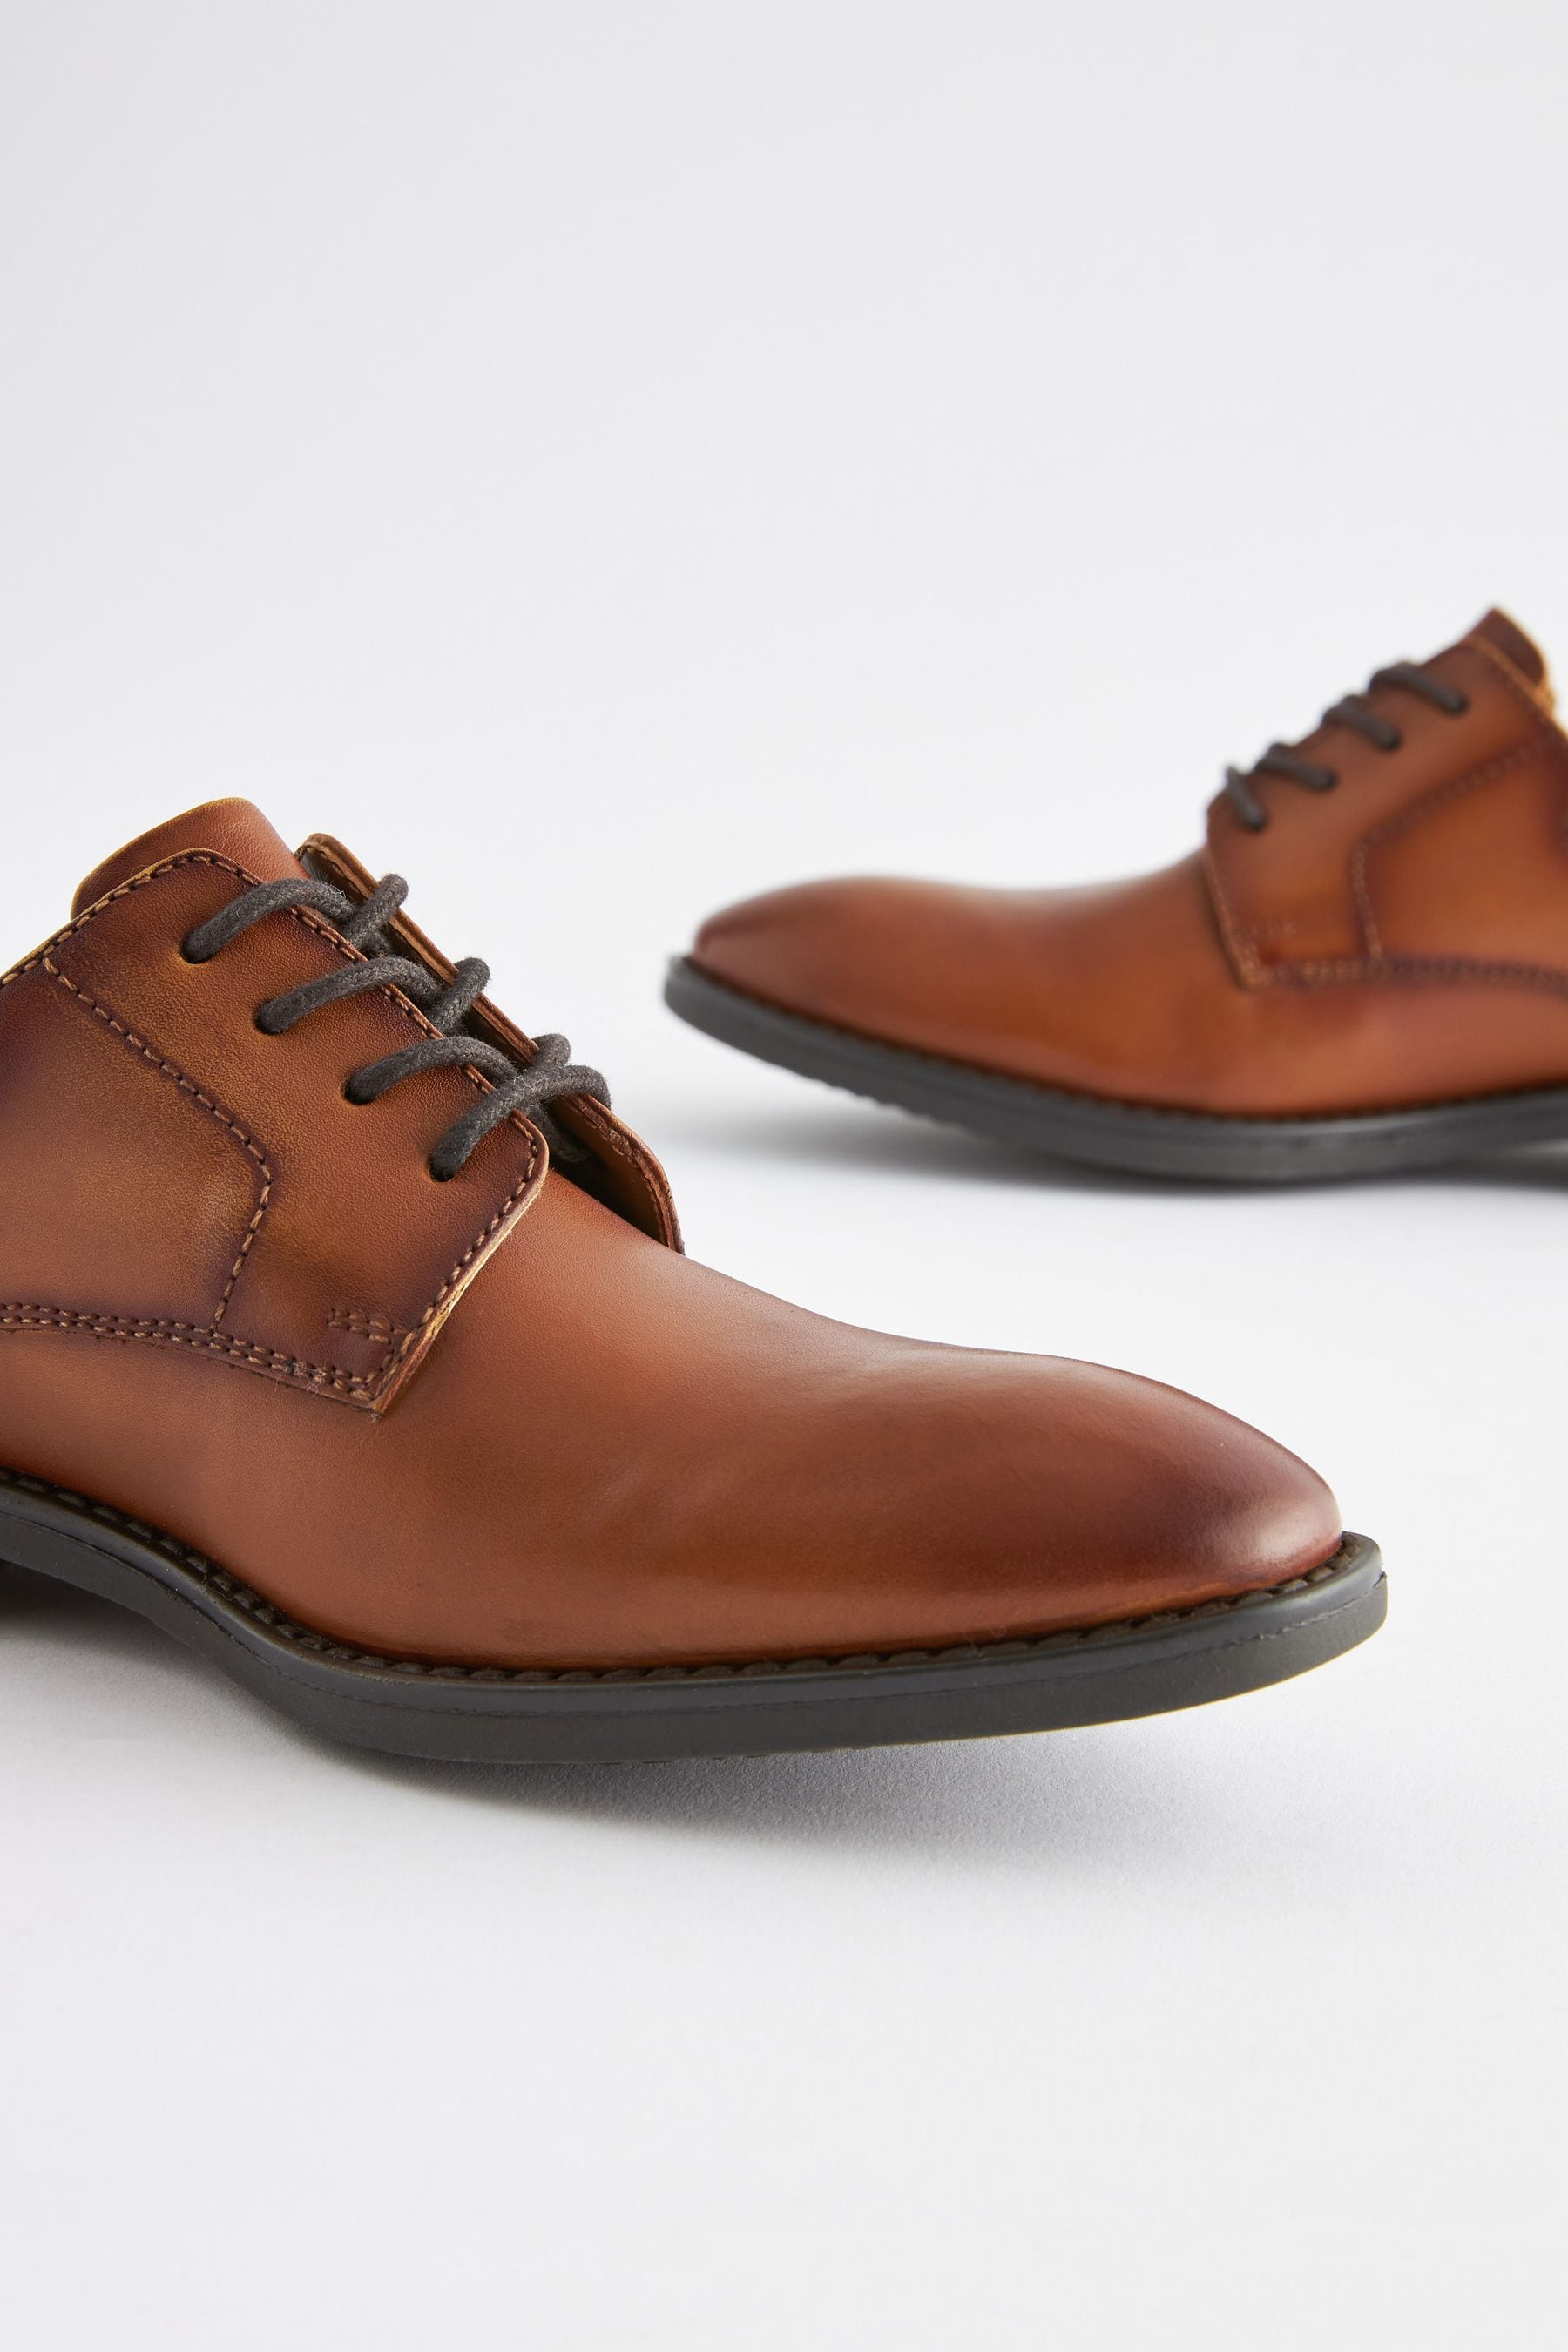 Buy Tan Brown Leather Lace-Up Shoes from the Next UK online shop